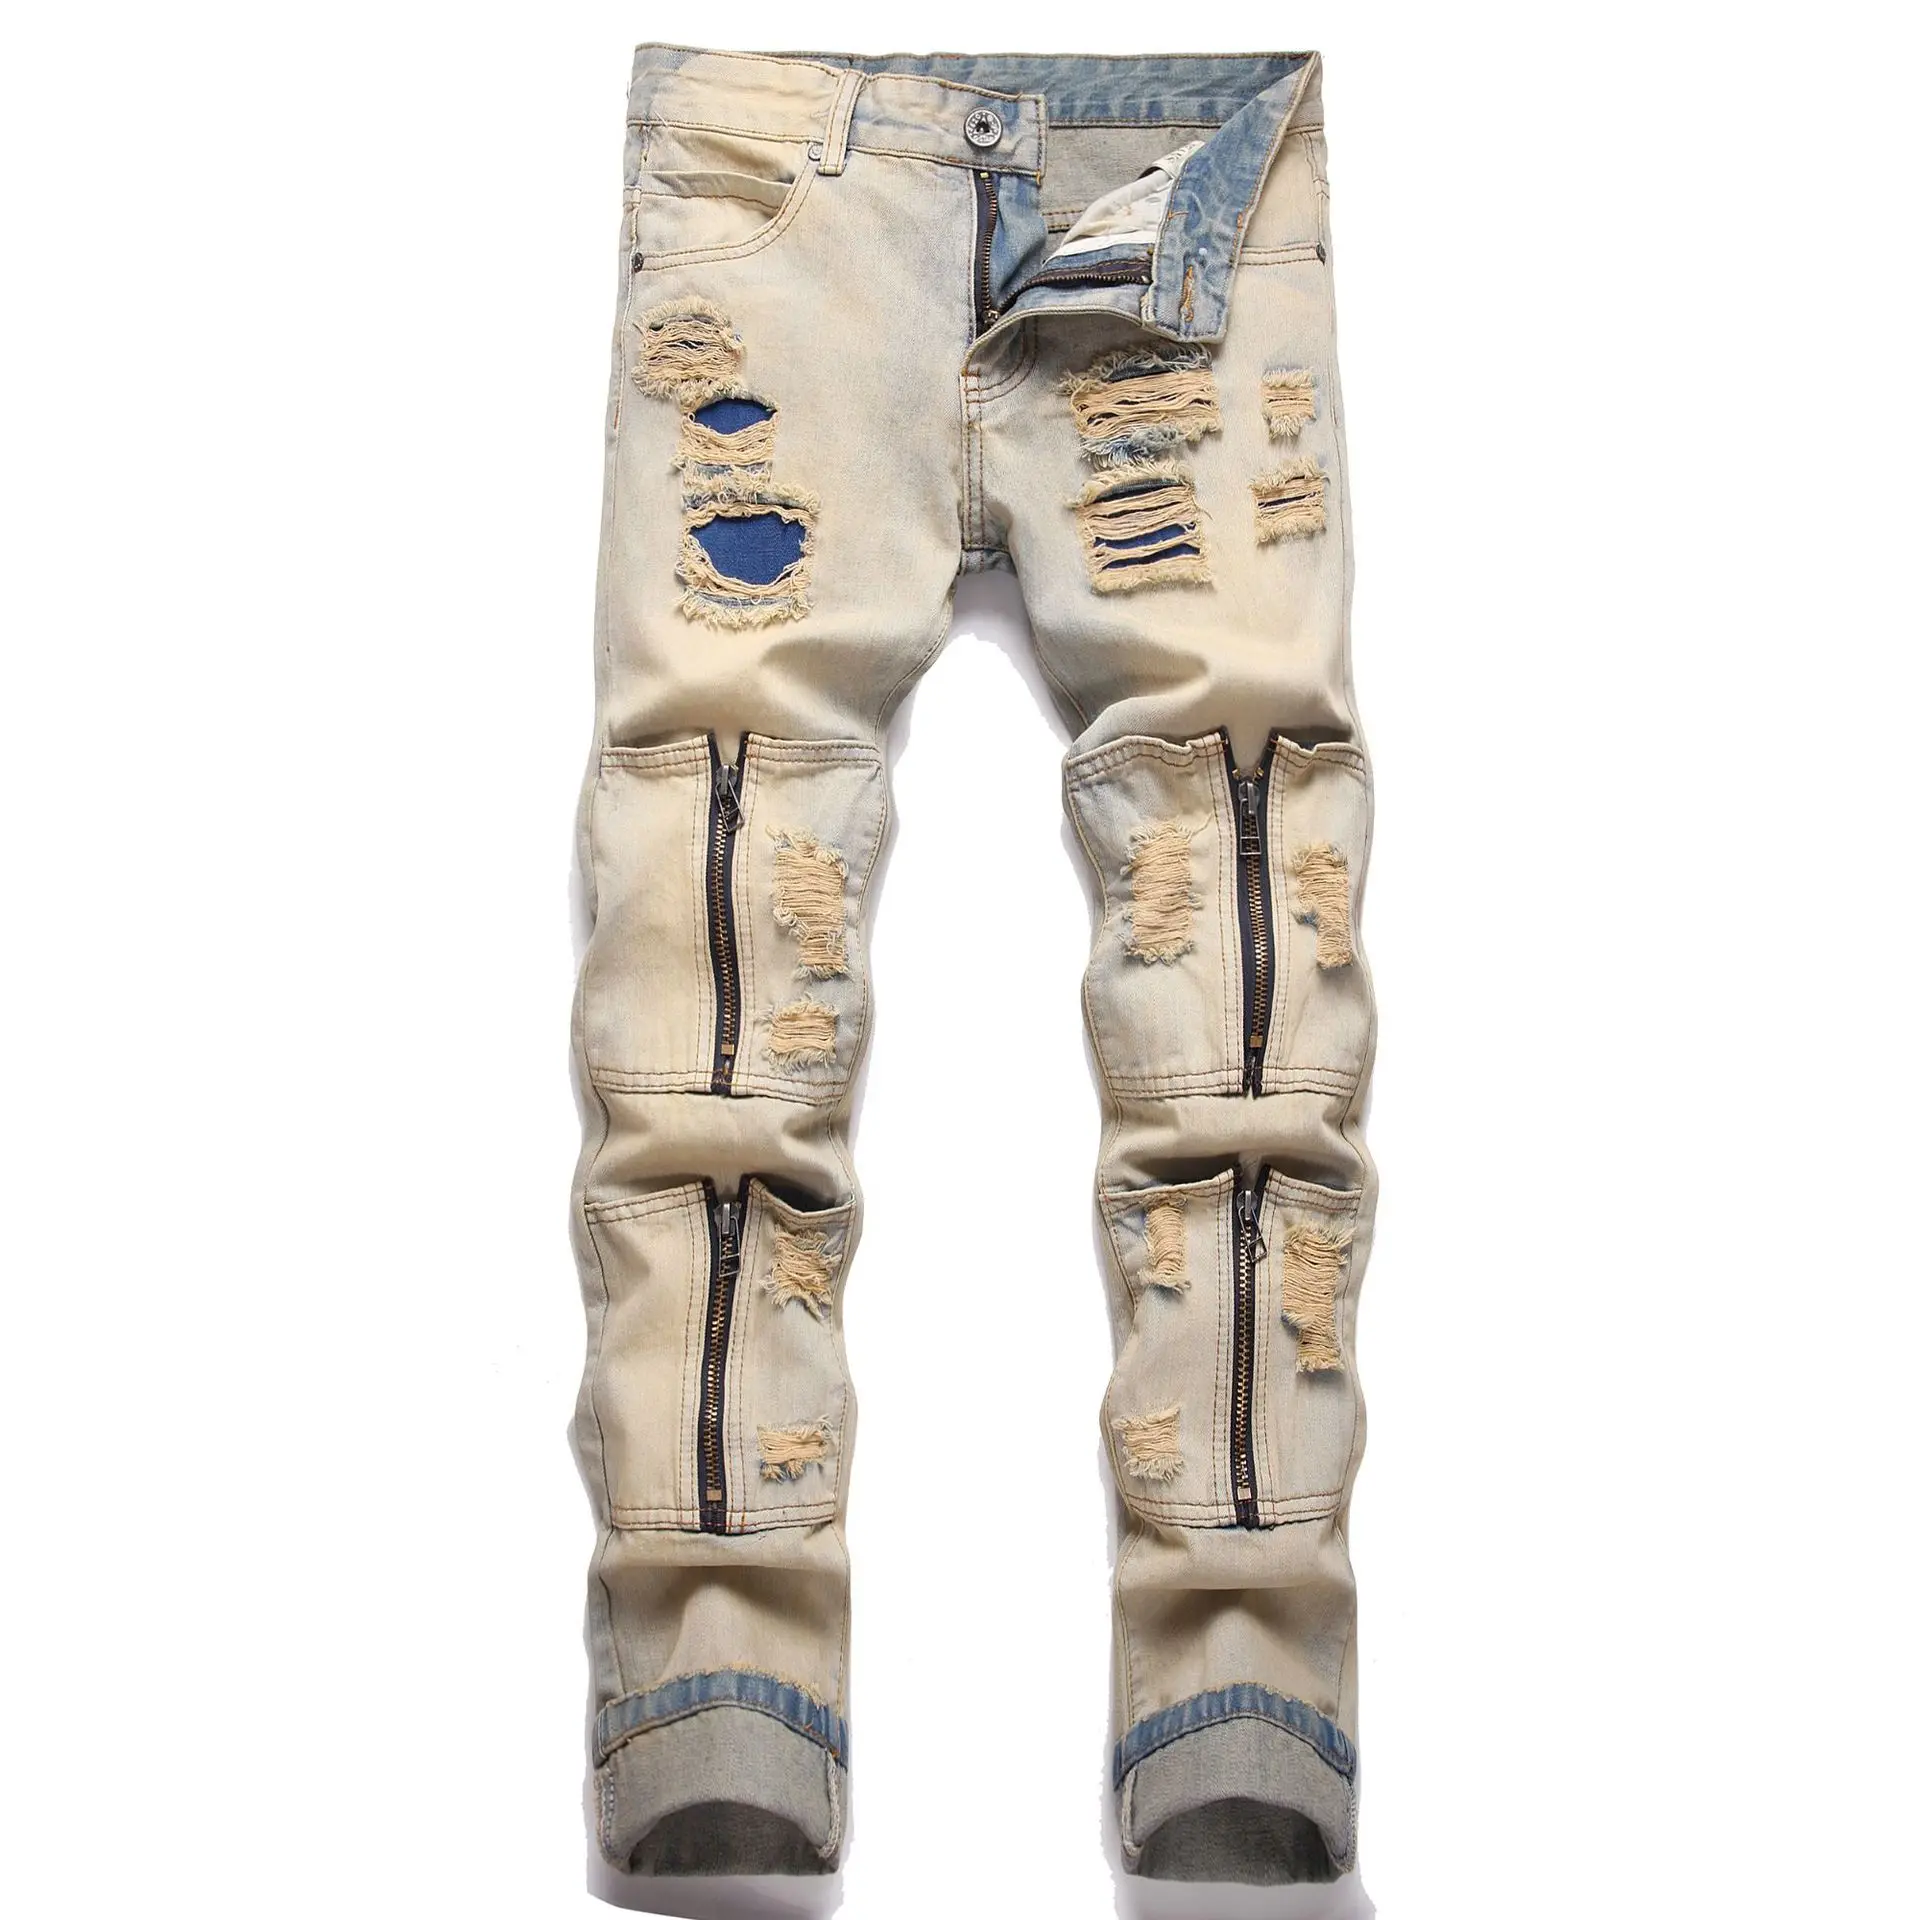 

2023 Spring New Listing Men's Cracked Patch Biker Jeans Streetwear Patchwork Stretch Denim Pants Holes Ripped Distressed Skinny